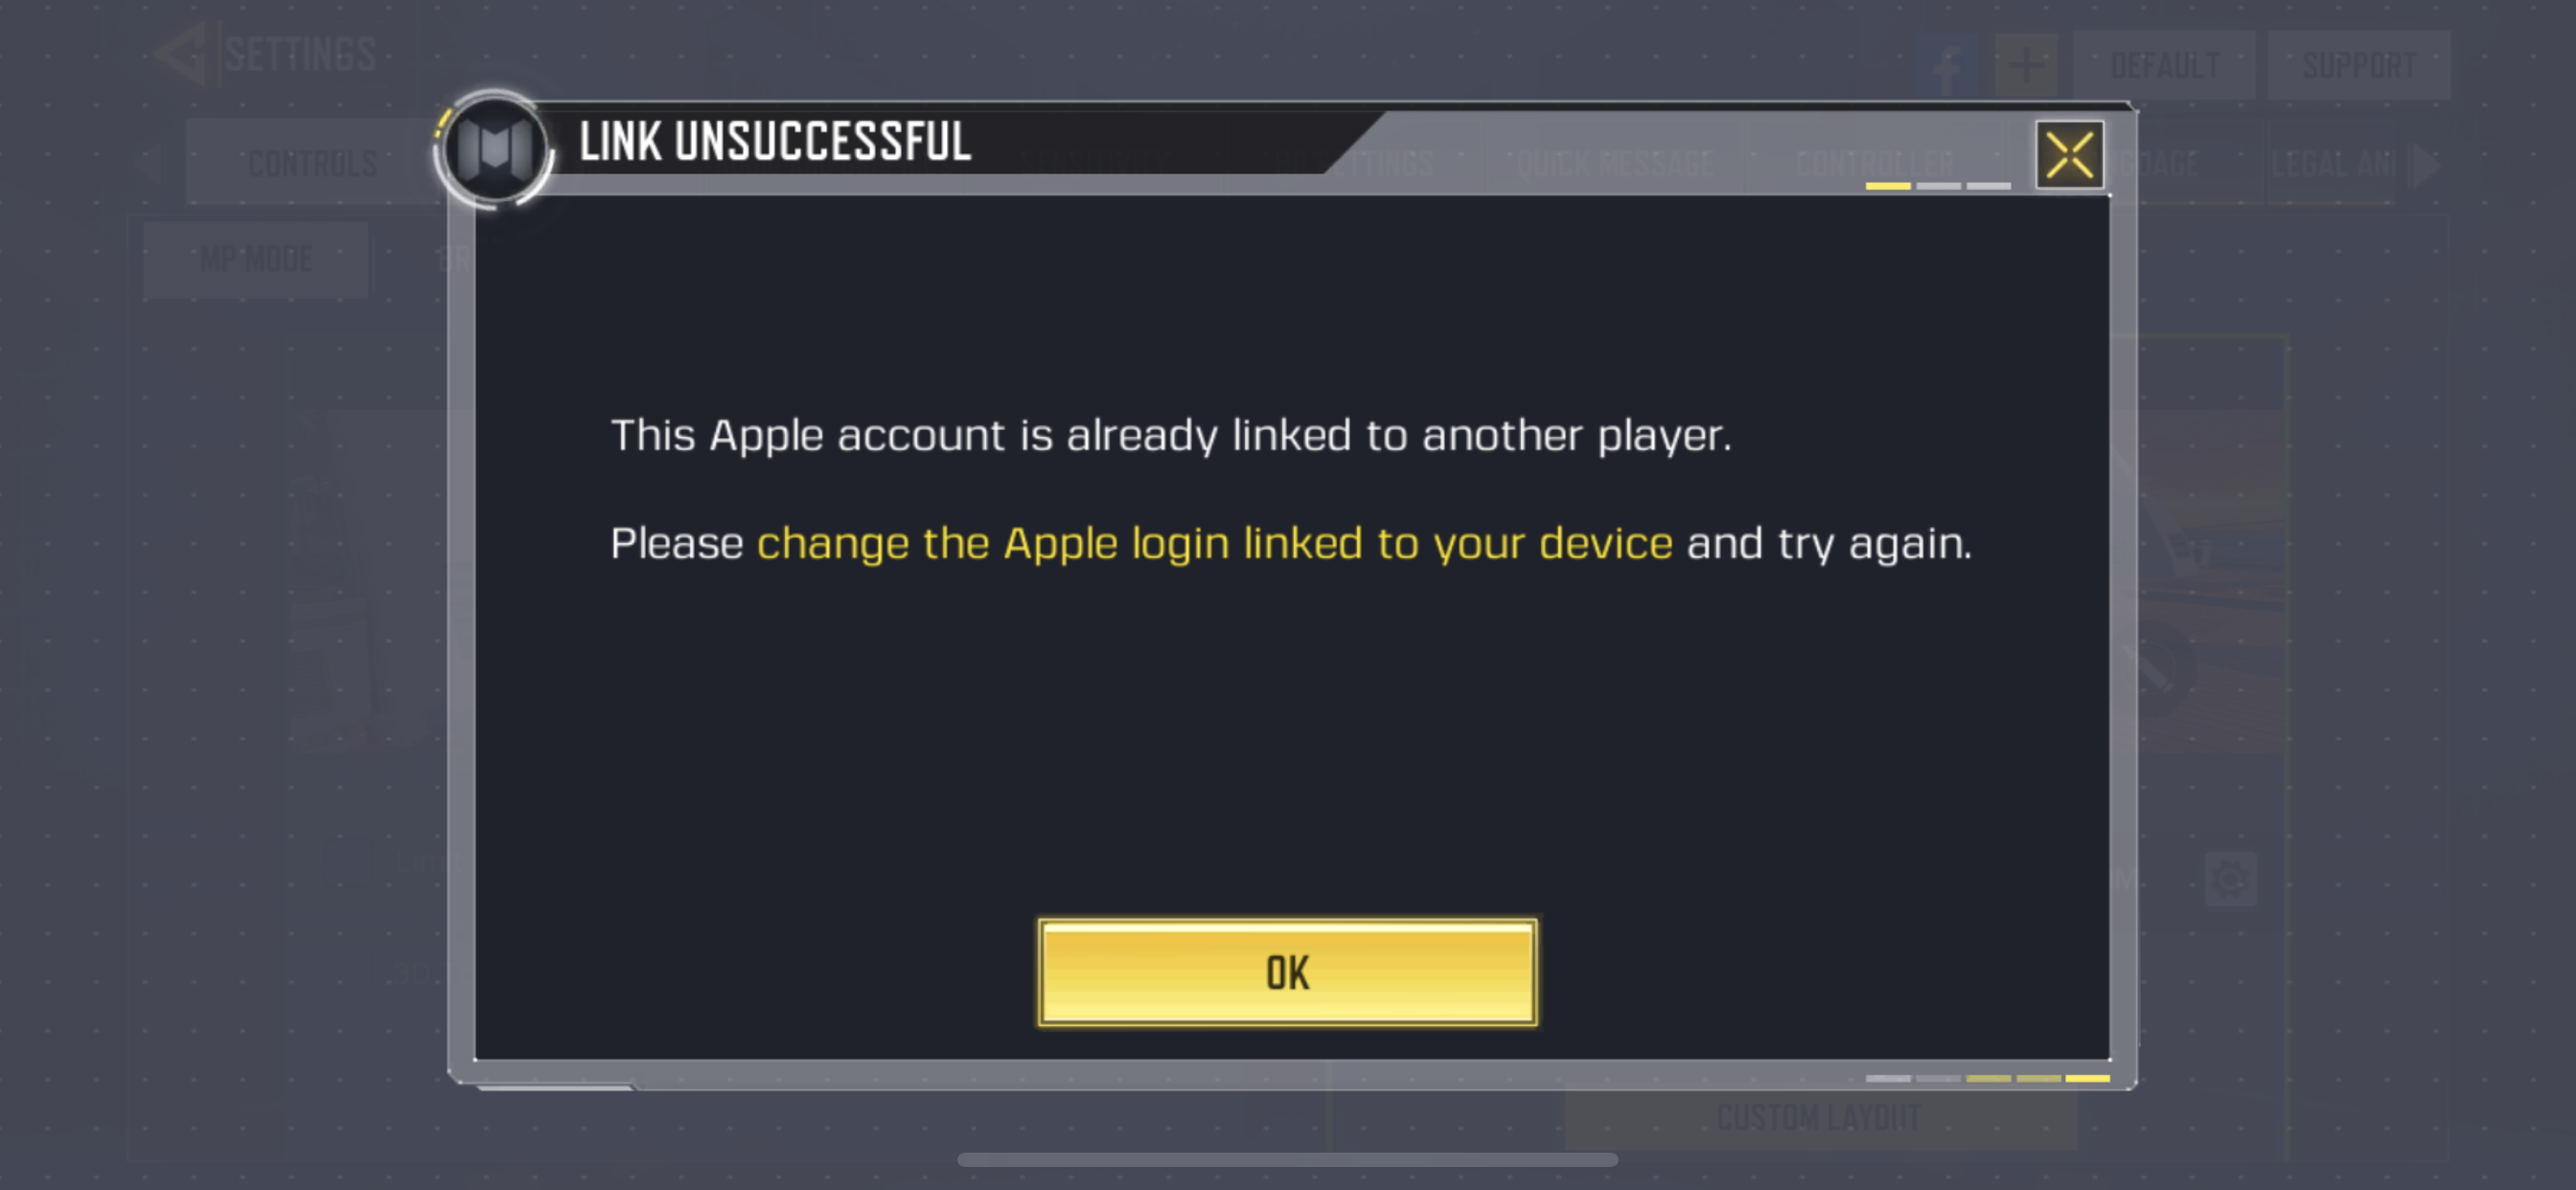 How can I delete an account that i've lin… - Apple Community